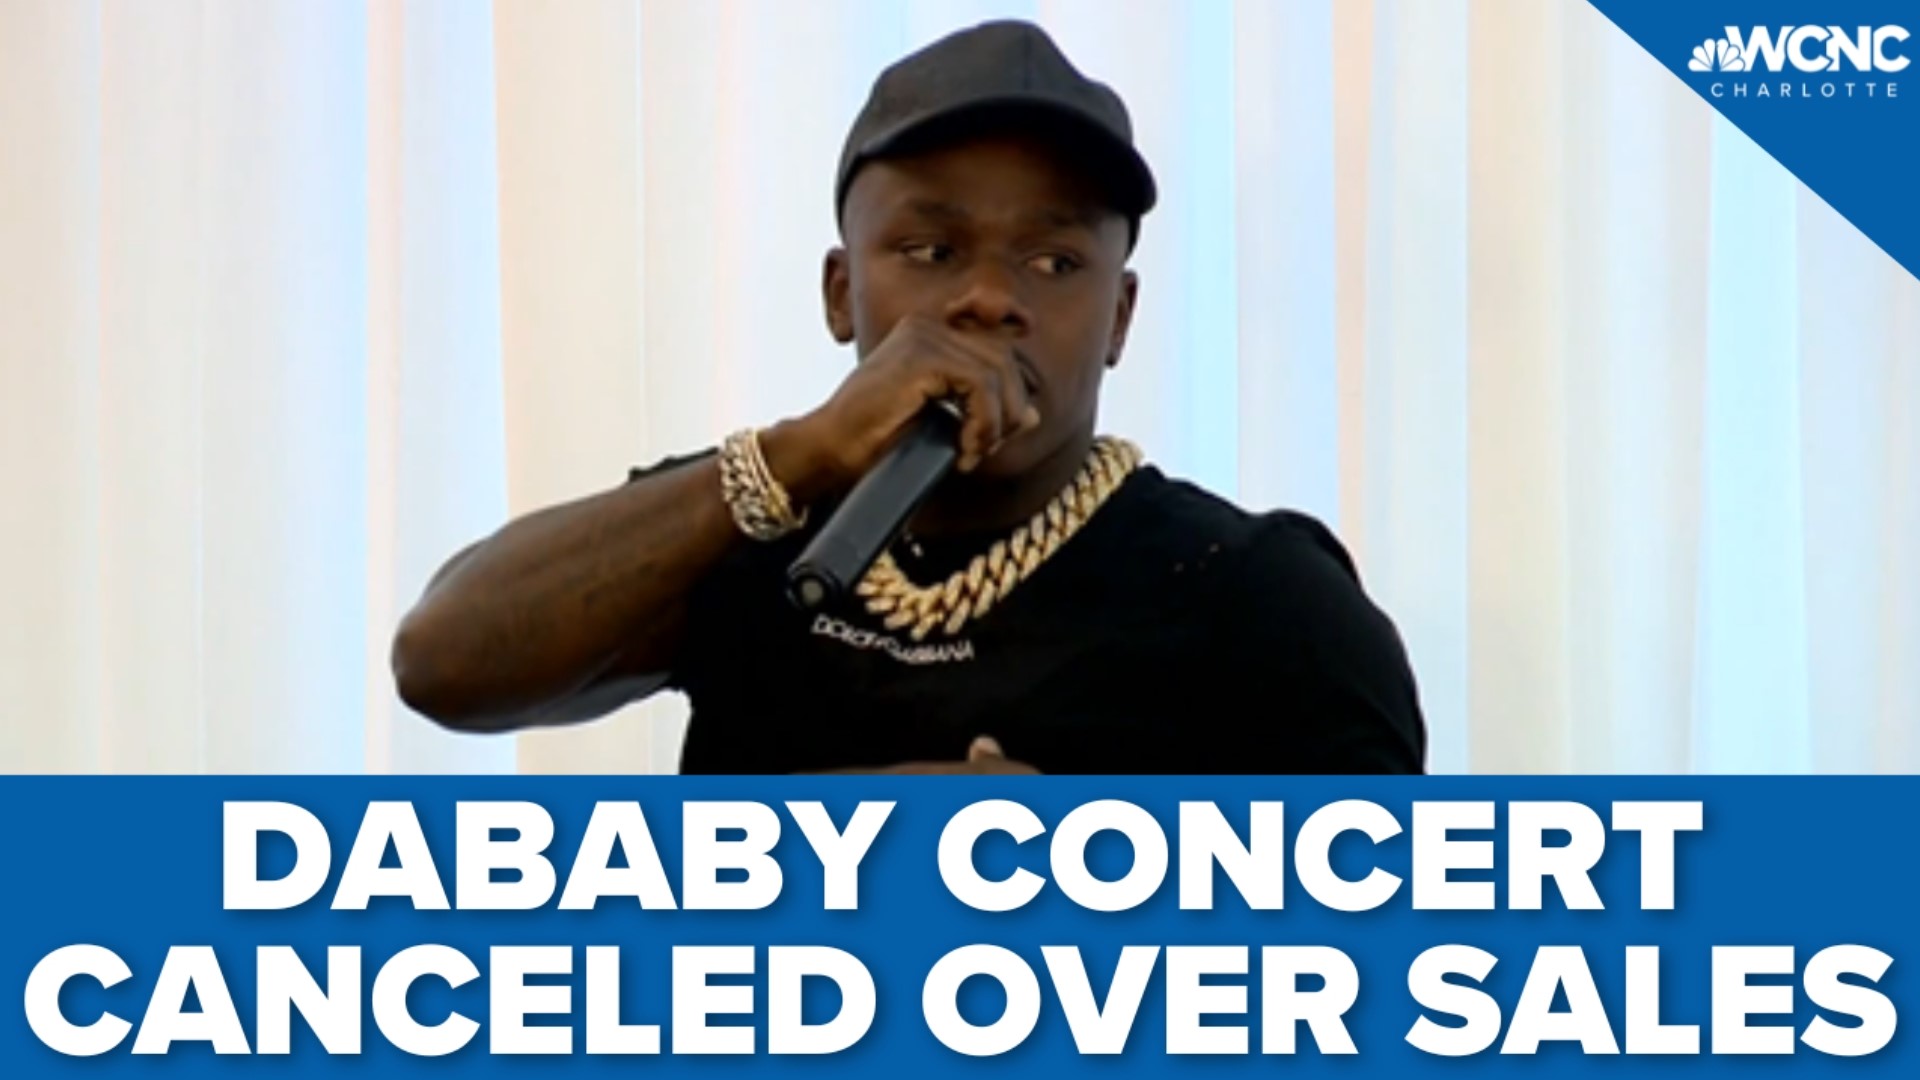 Charlotte rapper DaBaby's promoters canceled his upcoming concert in New Orleans due to low ticket sales, according to local media.